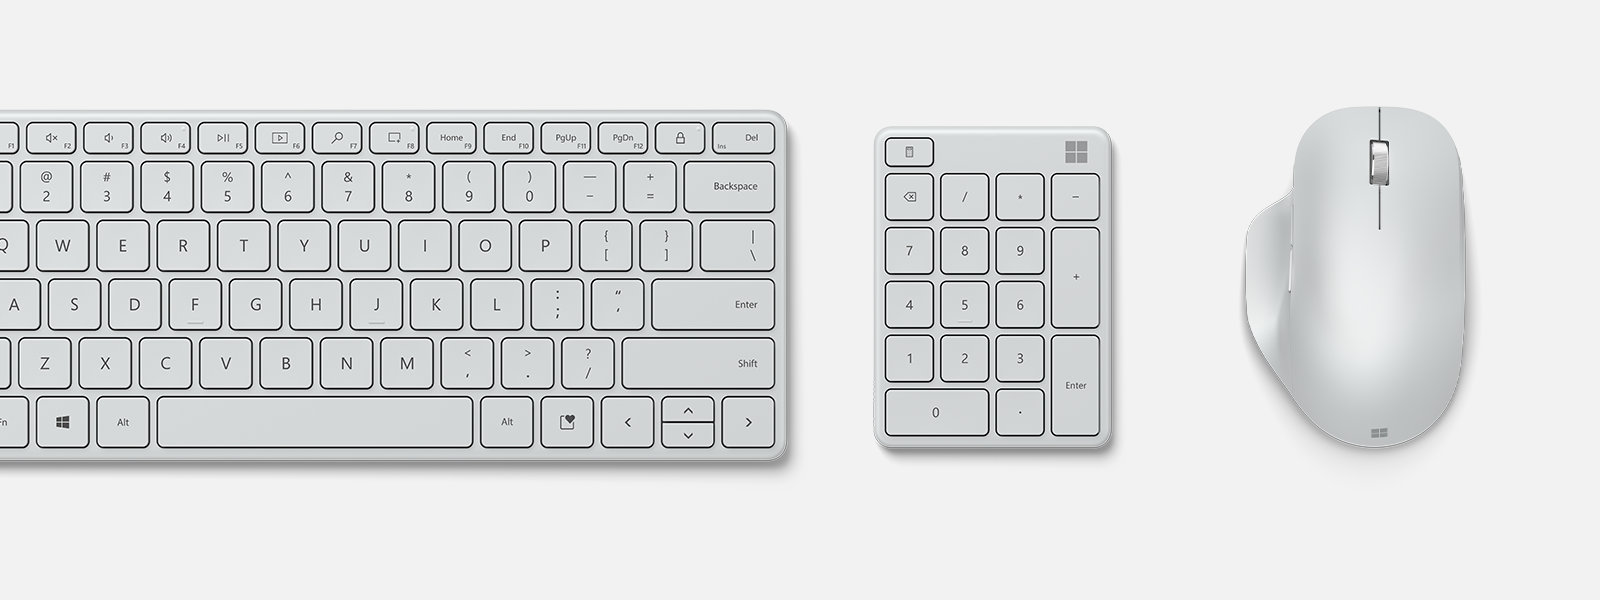 Microsoft Number Pad sits between a mouse and compact keyboard